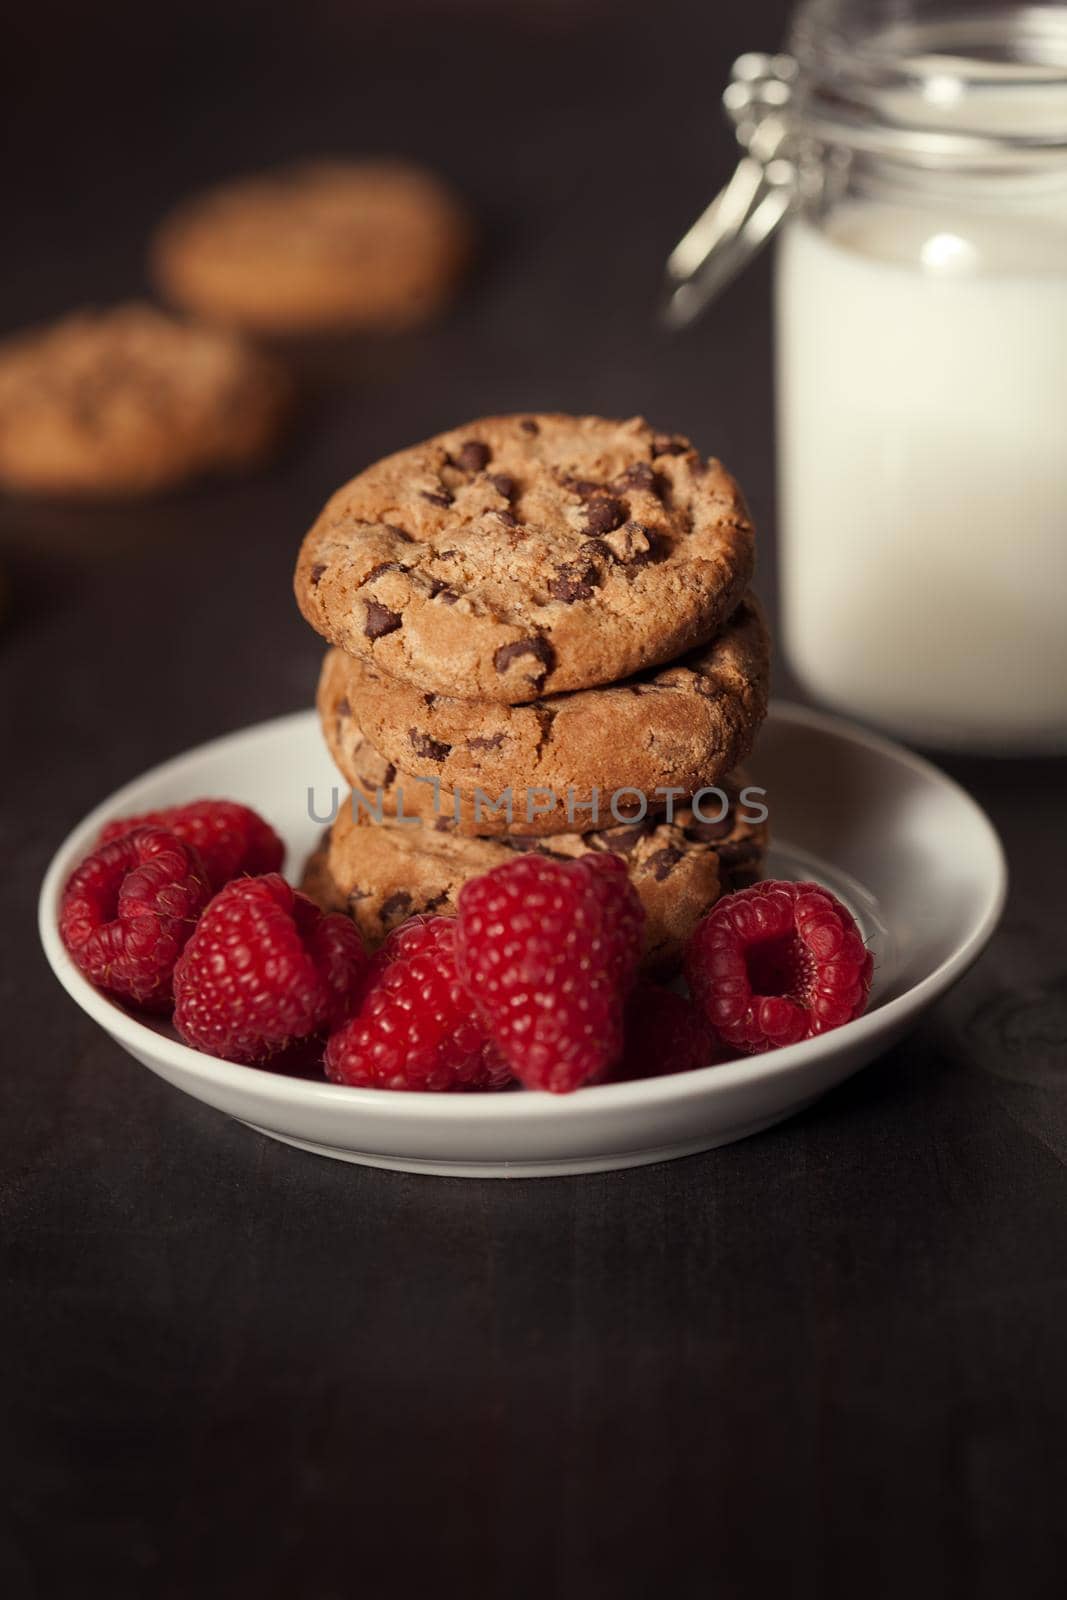 Chocolate chip cookies with red raspberry and milk on rustic wood background. Homemade dessert.